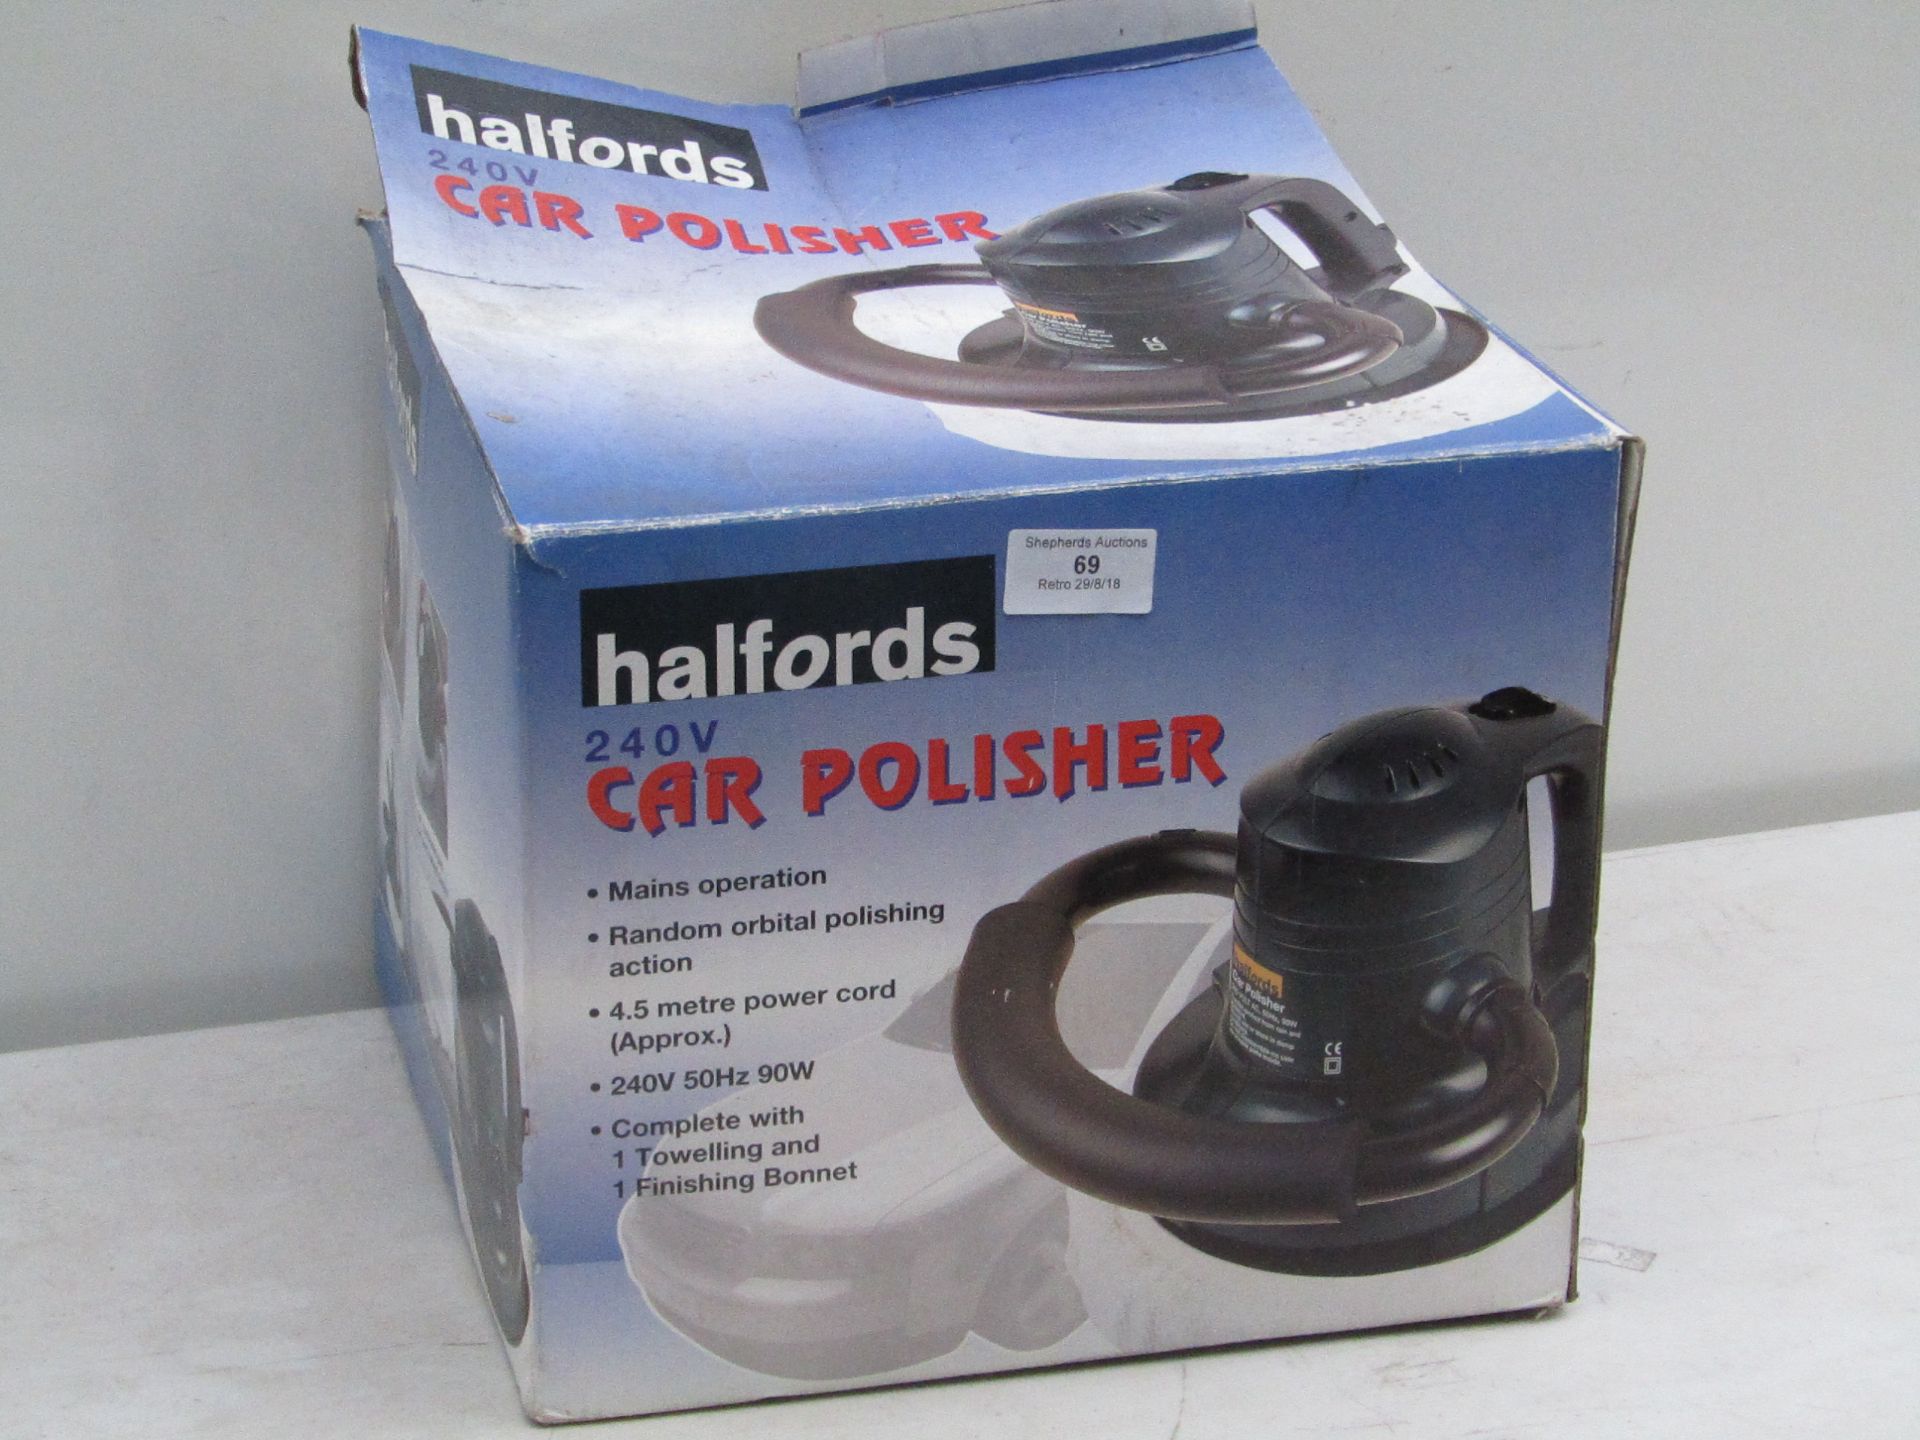 Halfords car polisher, untested and boxed.